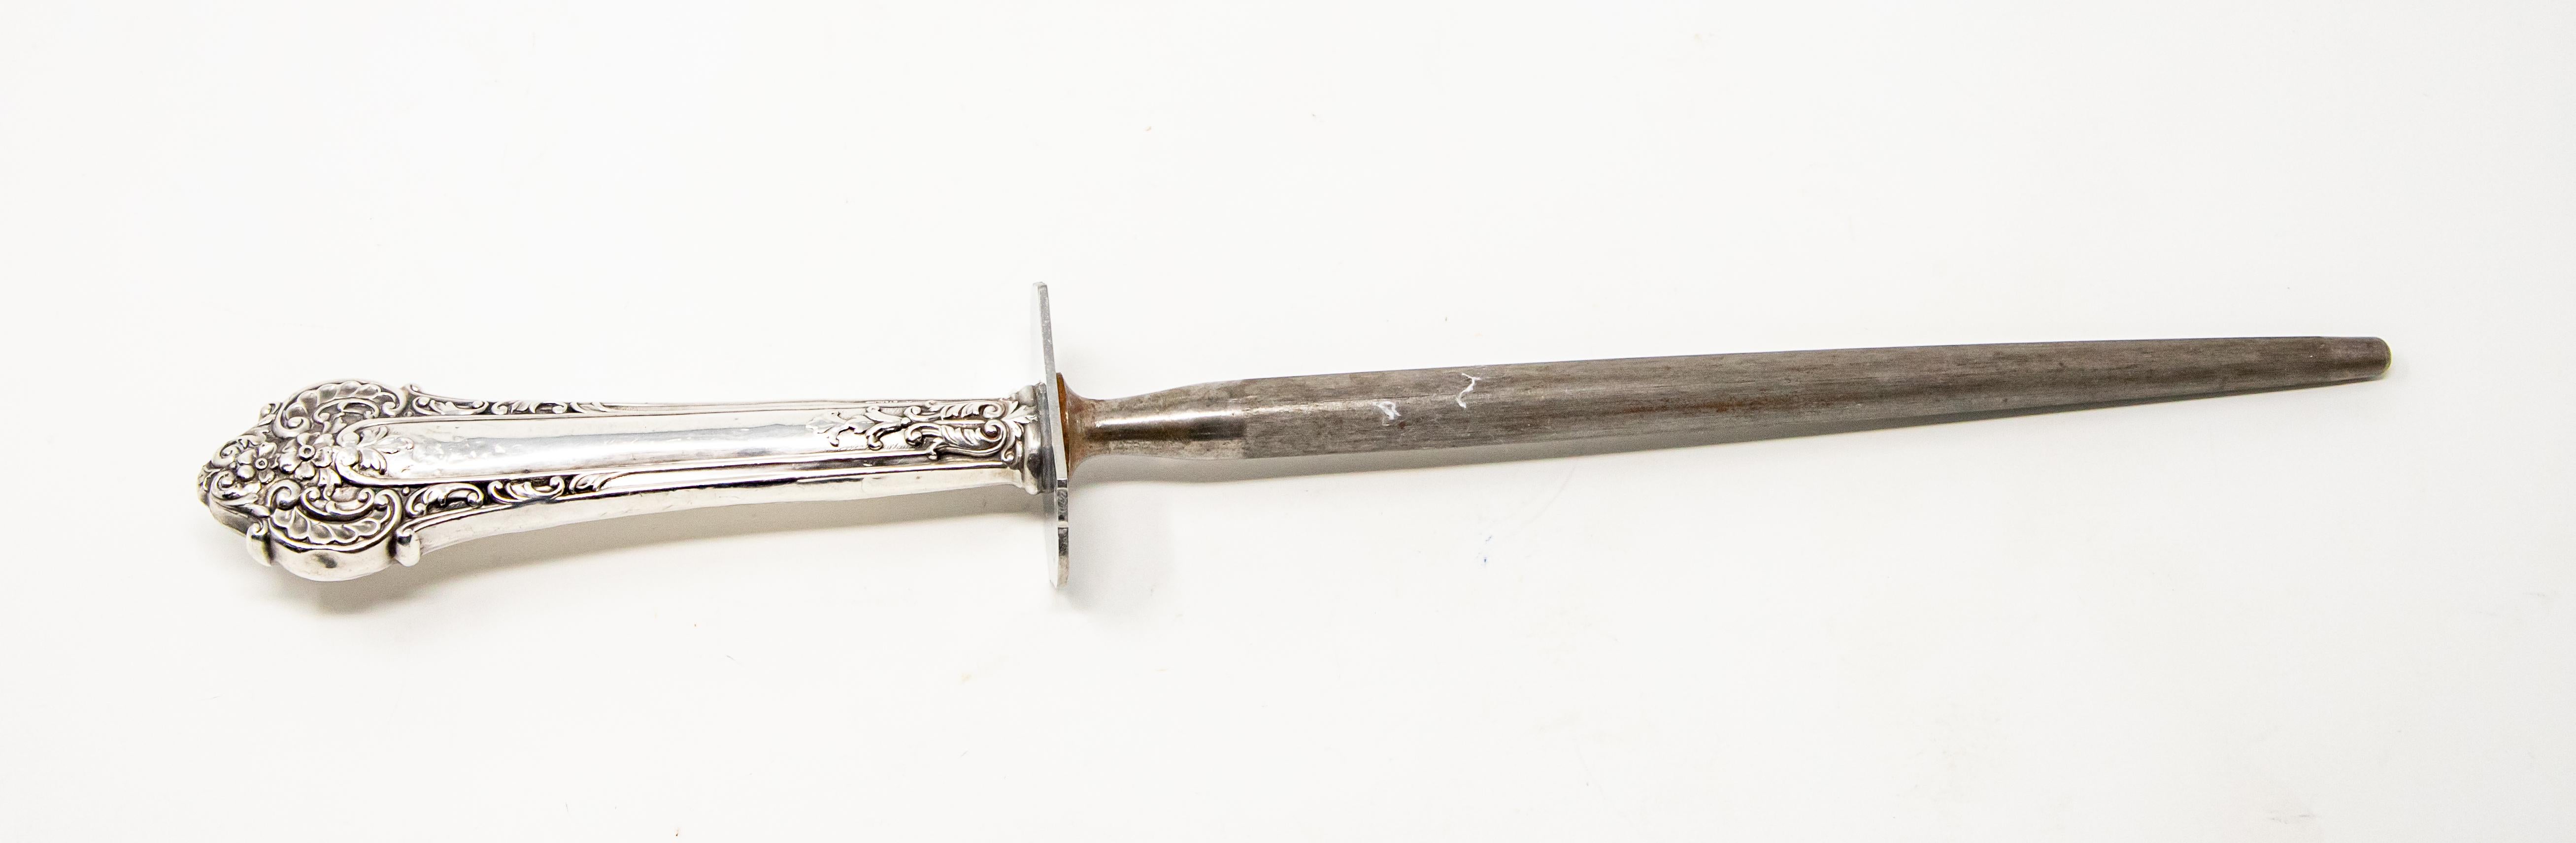 Offering this sterling silver knife sharpener. Having a sterling handle with scrollwork and foliate detail. Hallmarked on the guard sterling handle, with an A in the middle.